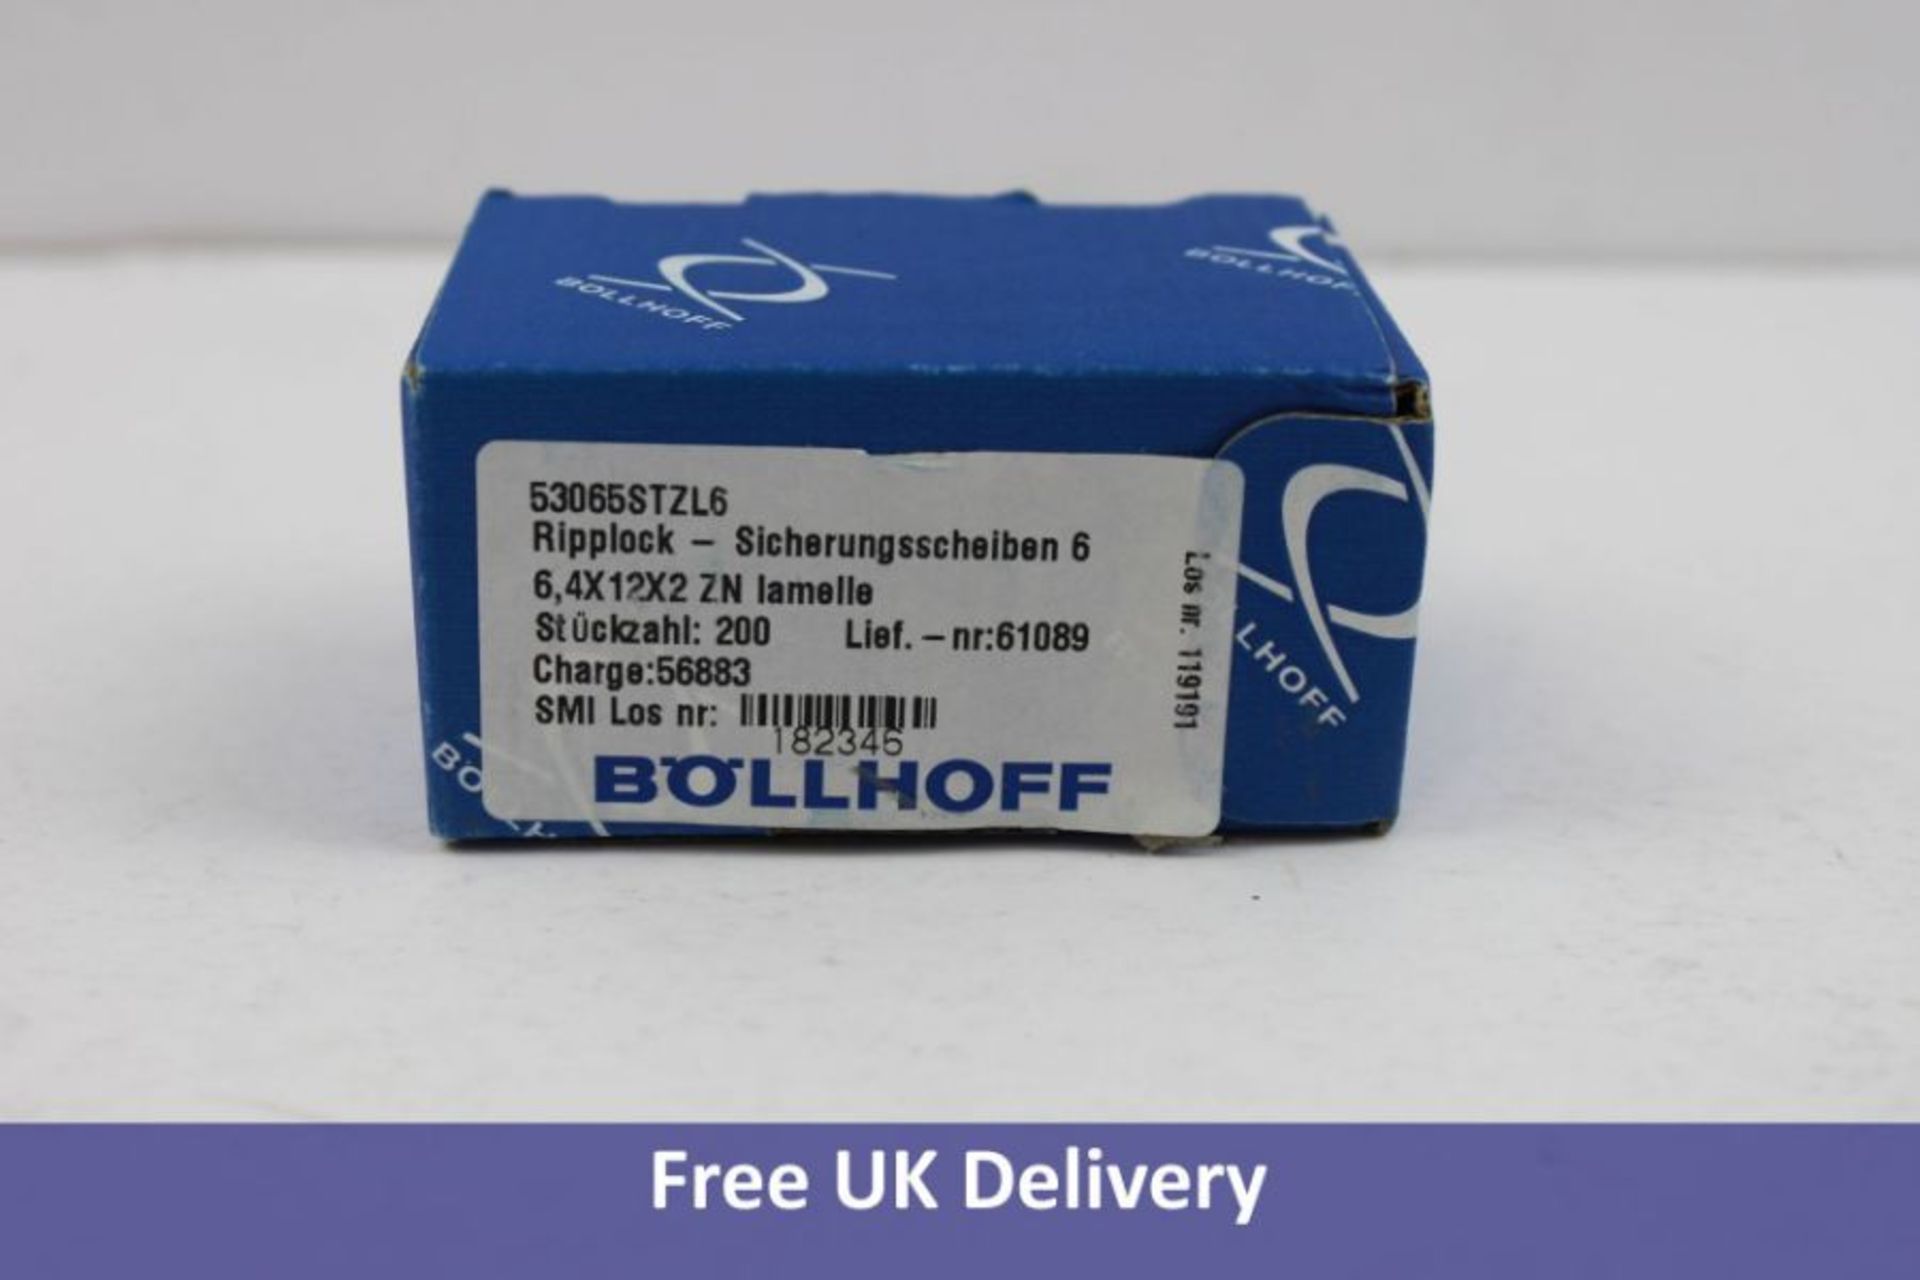 Two hundred Bollhoff RIPP LOCK® Self-locking Washers, Ribbed on Both Sides